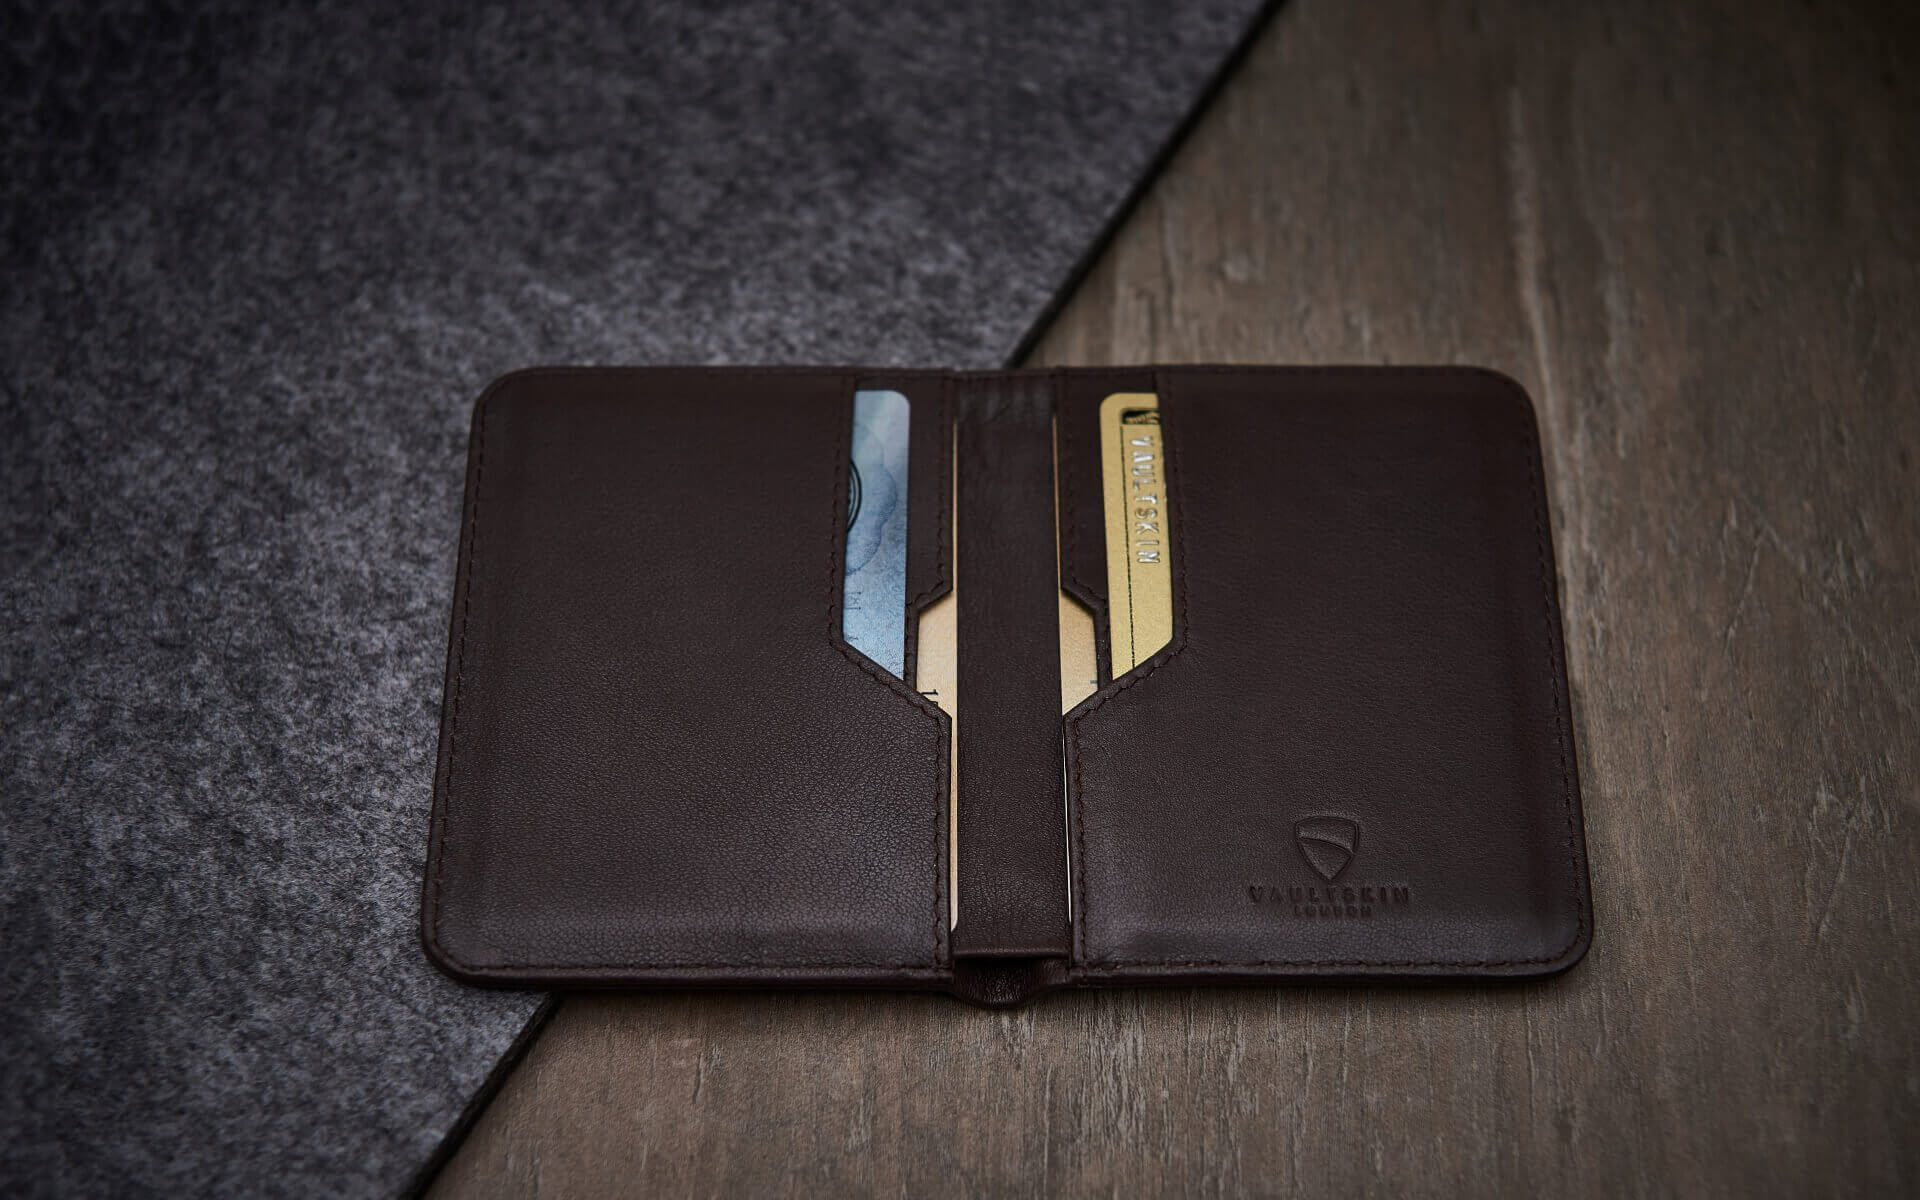 Functionality meets style in the Vaultskin CITY brown wallet, illustrating its RFID-blocking capability and smart, compact design